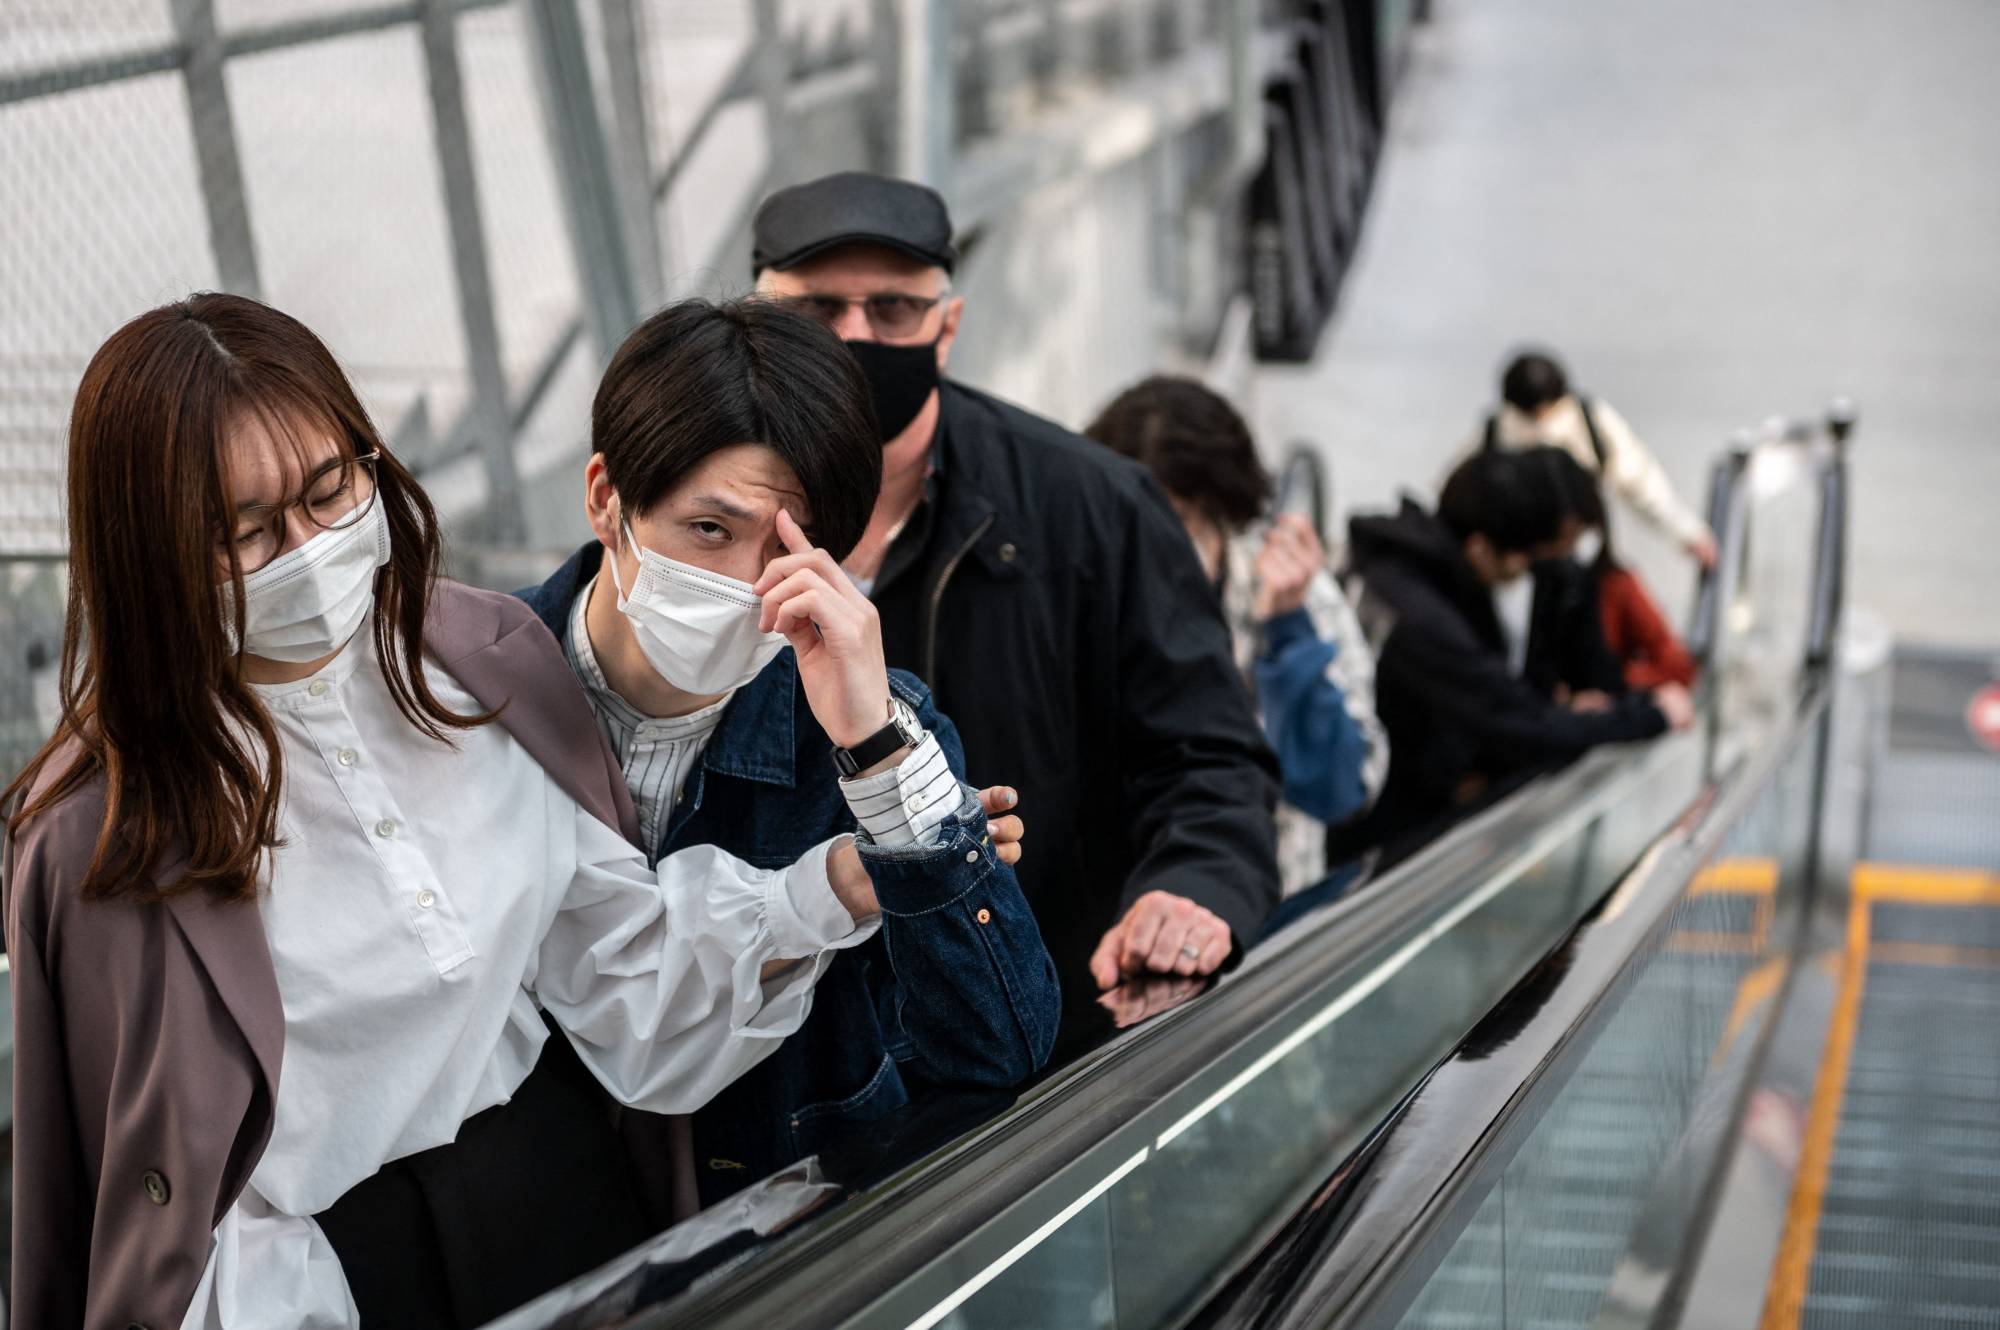 People visit a shopping mall in Tokyo on Saturday, a day before a new coronavirus state of emergency covering Tokyo, Osaka, Kyoto and Hyogo prefectures went into effect. | AFP-JIJI